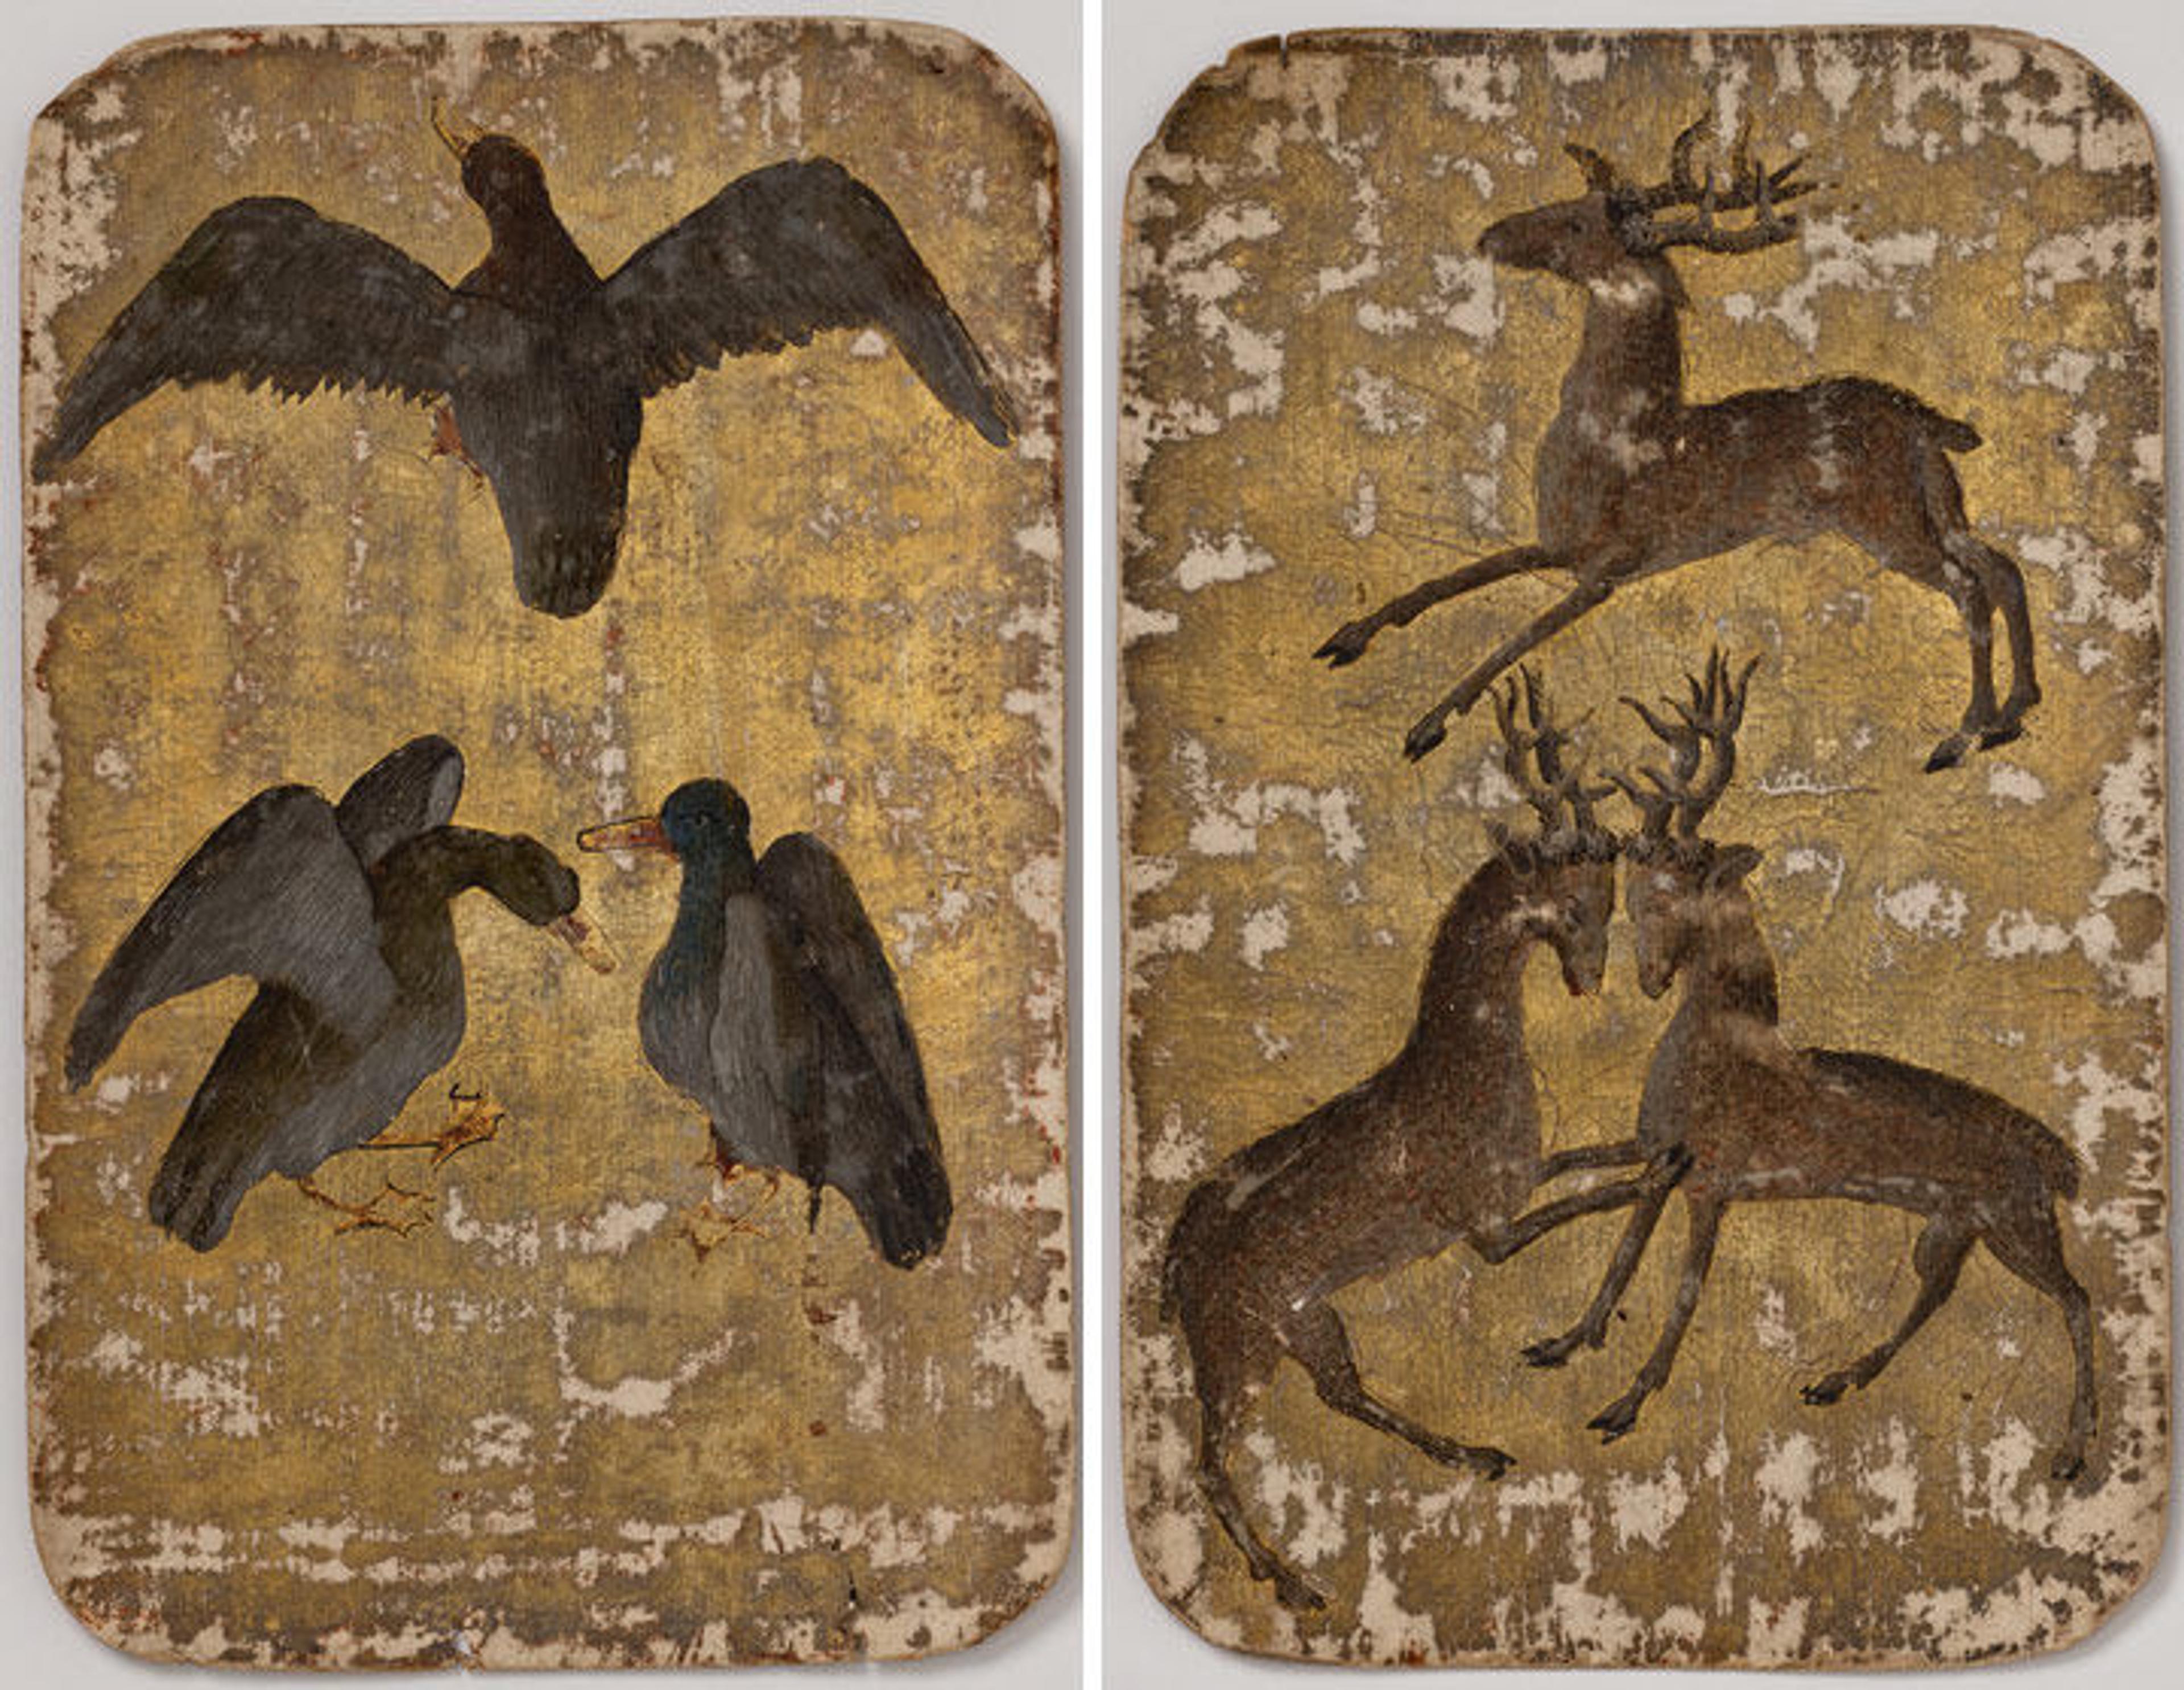 Left: 3 of Ducks, from The Stuttgart Playing Cards, ca. 1430. Made in Upper Rhineland, Germany. Paper (six layers in pasteboard) with gold ground and opaque paint over pen and ink; 7 1/2 x 4 3/4 in. (19.1 x 12.1 cm). Landesmuseum Württemberg, Stuttgart. Right: On this card, the etched lines had raised forelegs, but the painter chose to lower them. 3 of Stags, from The Stuttgart Playing Cards, ca. 1430. Made in Upper Rhineland, Germany. Paper (six layers in pasteboard) with gold ground and opaque paint over pen and ink; 7 1/2 x 4 3/4 in. (19.1 x 12.1 cm). Landesmuseum Württemberg, Stuttgart